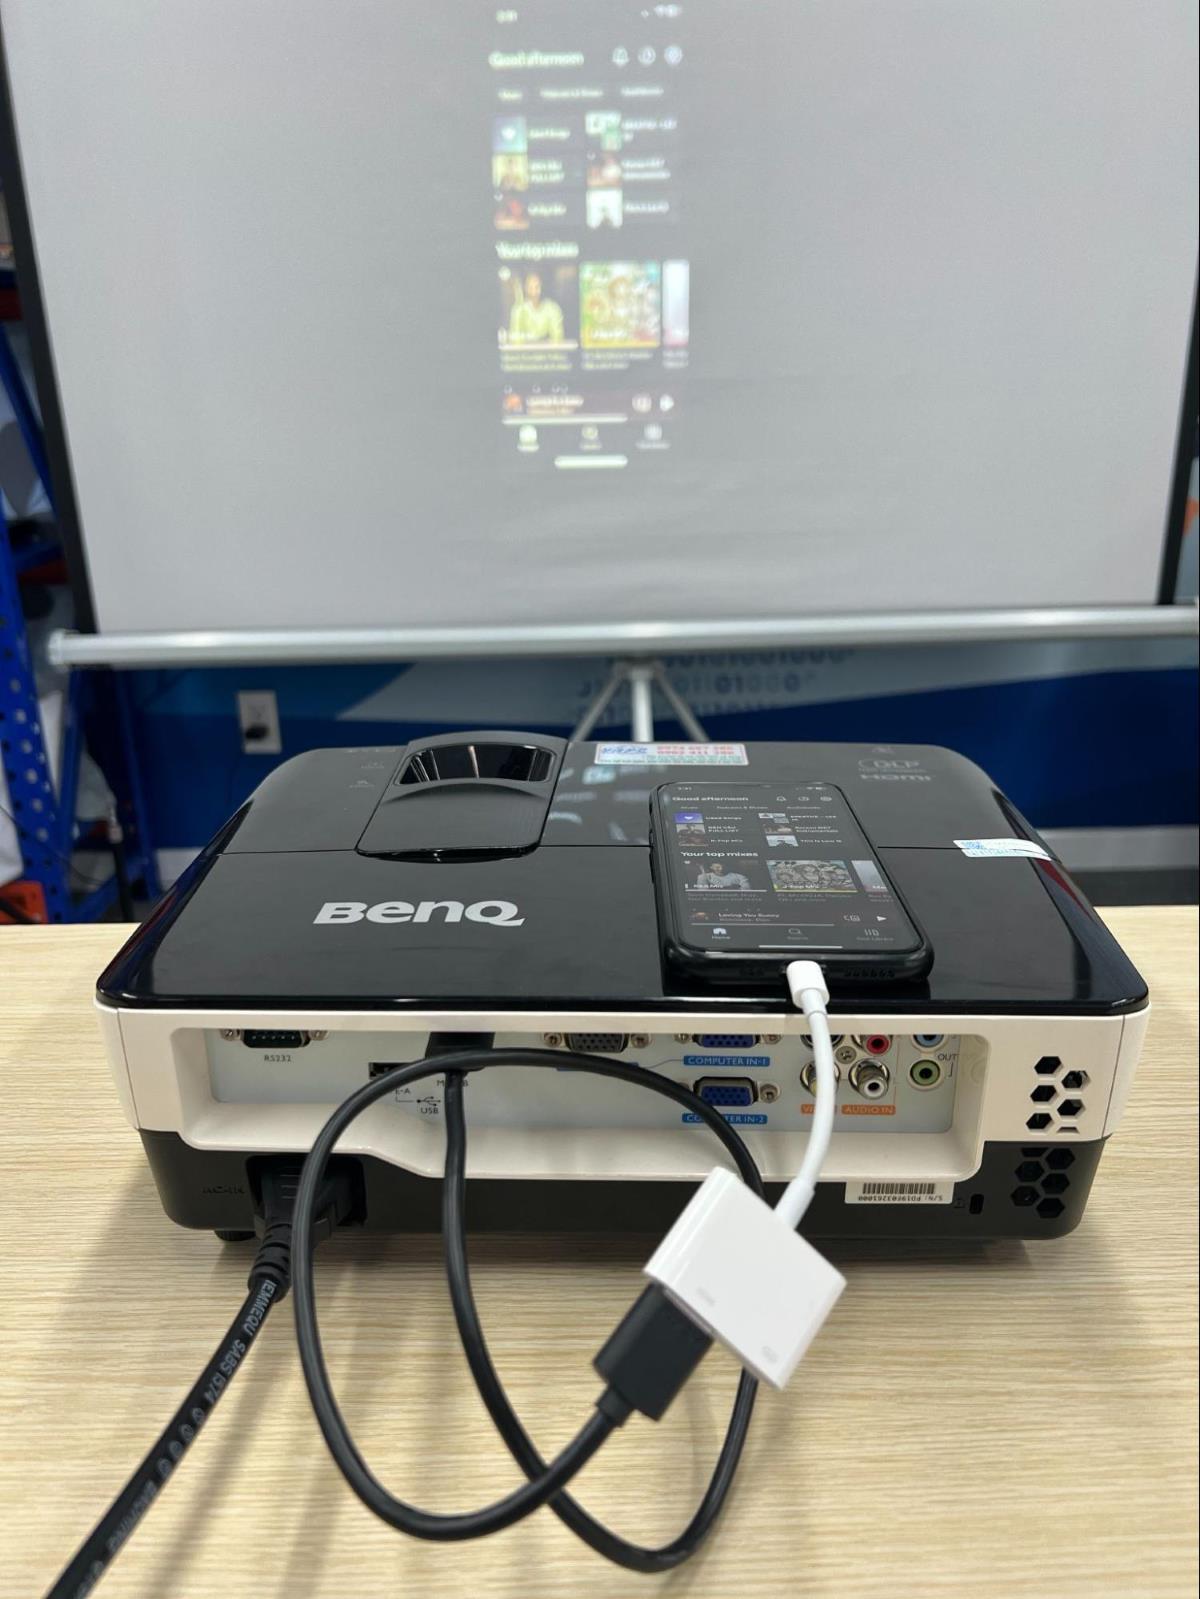 How to Connect Your Phone to a BenQ Projector (iPhone, Android)